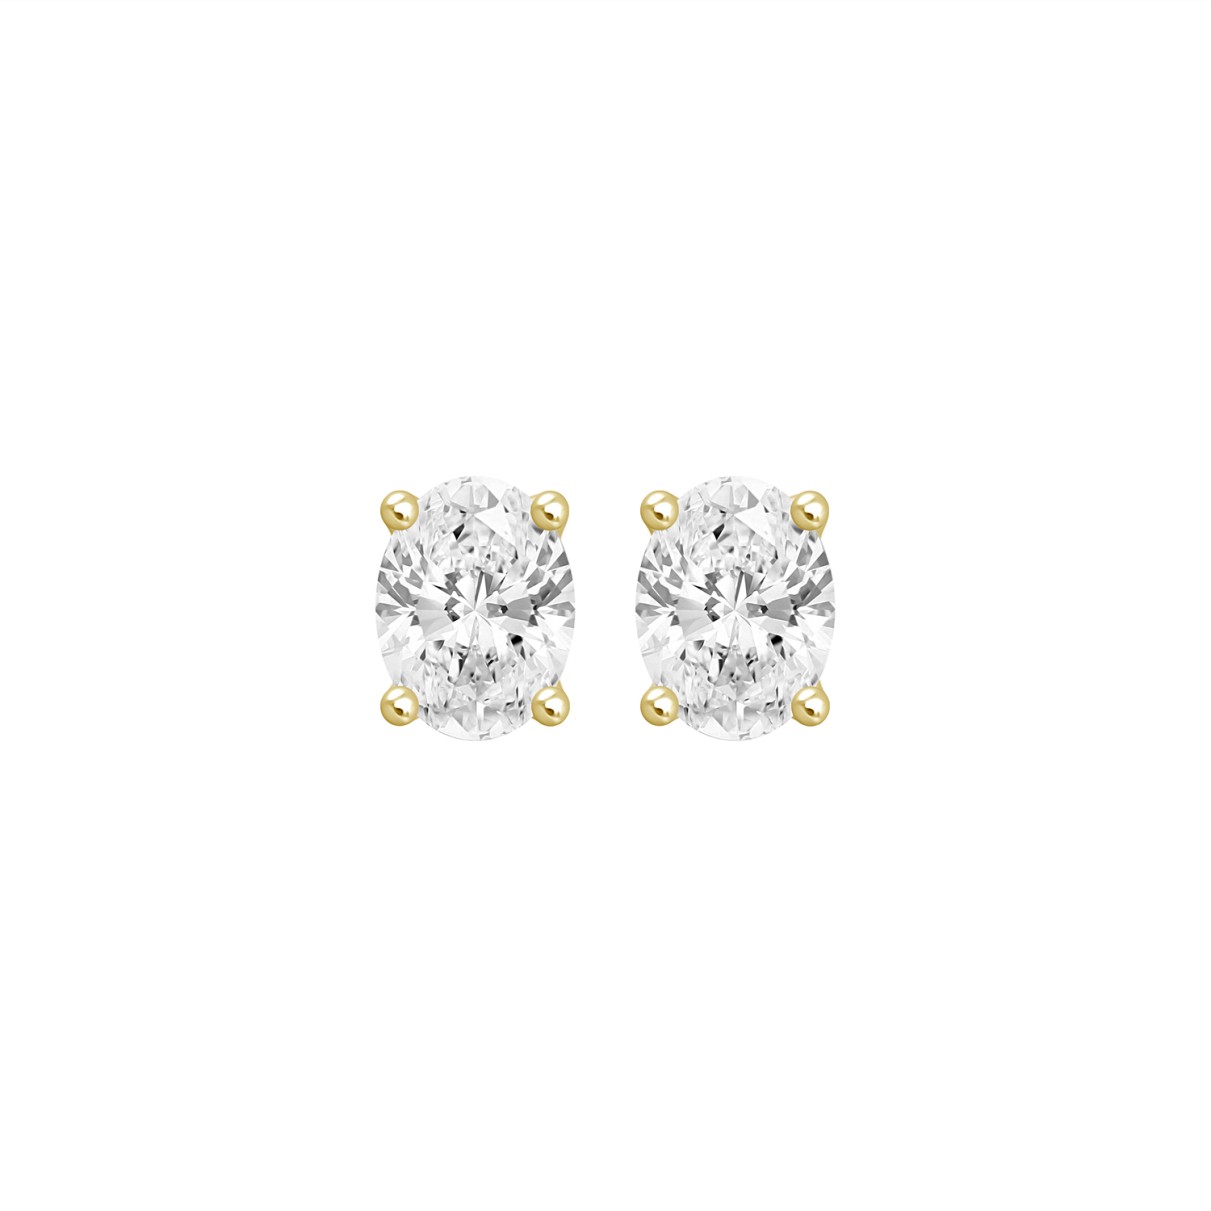 LADIES SOLITAIRE EARRINGS 1 1/2CT OVAL DIAMOND 14K YELLOW GOLD